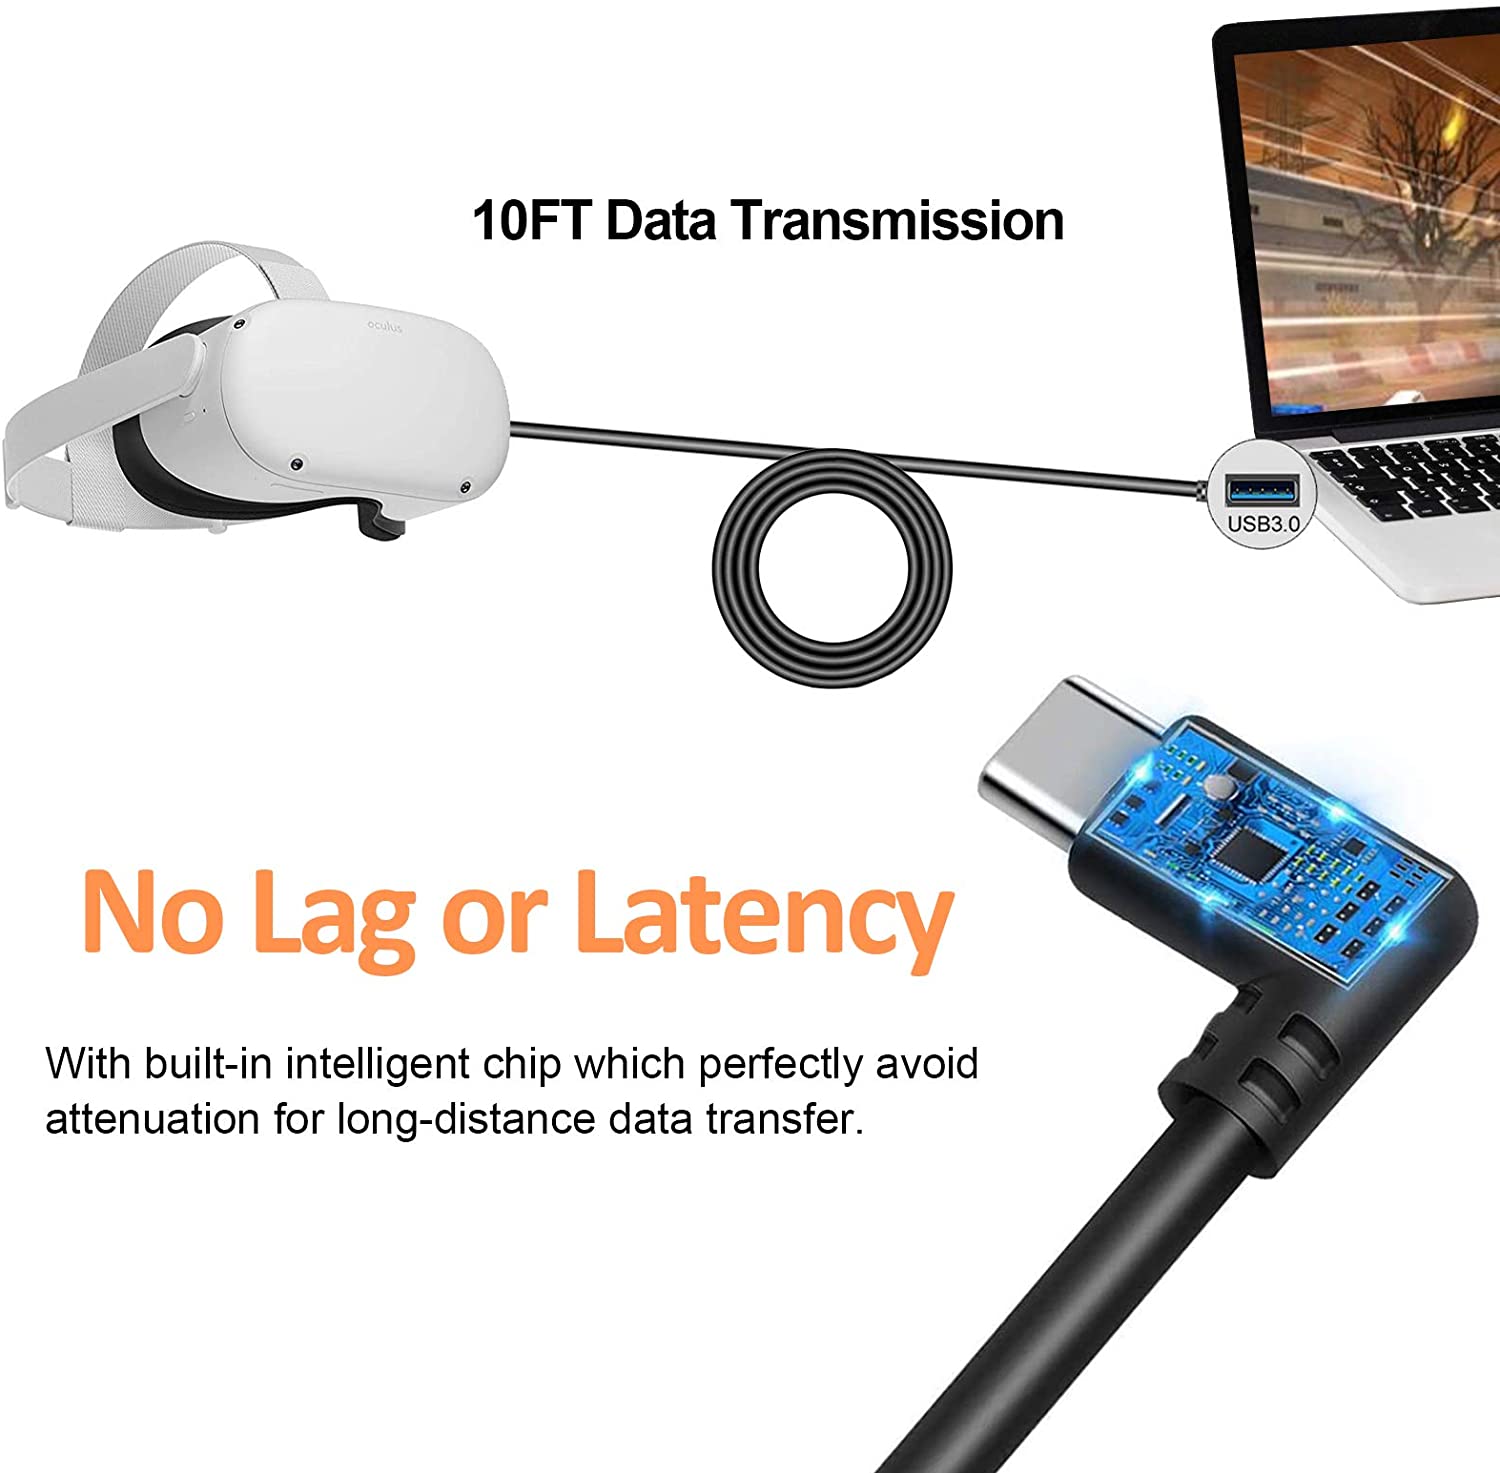 10ft/3m cable ideal for long-distance charging, with built-in smart chip to avoid data attenuation.